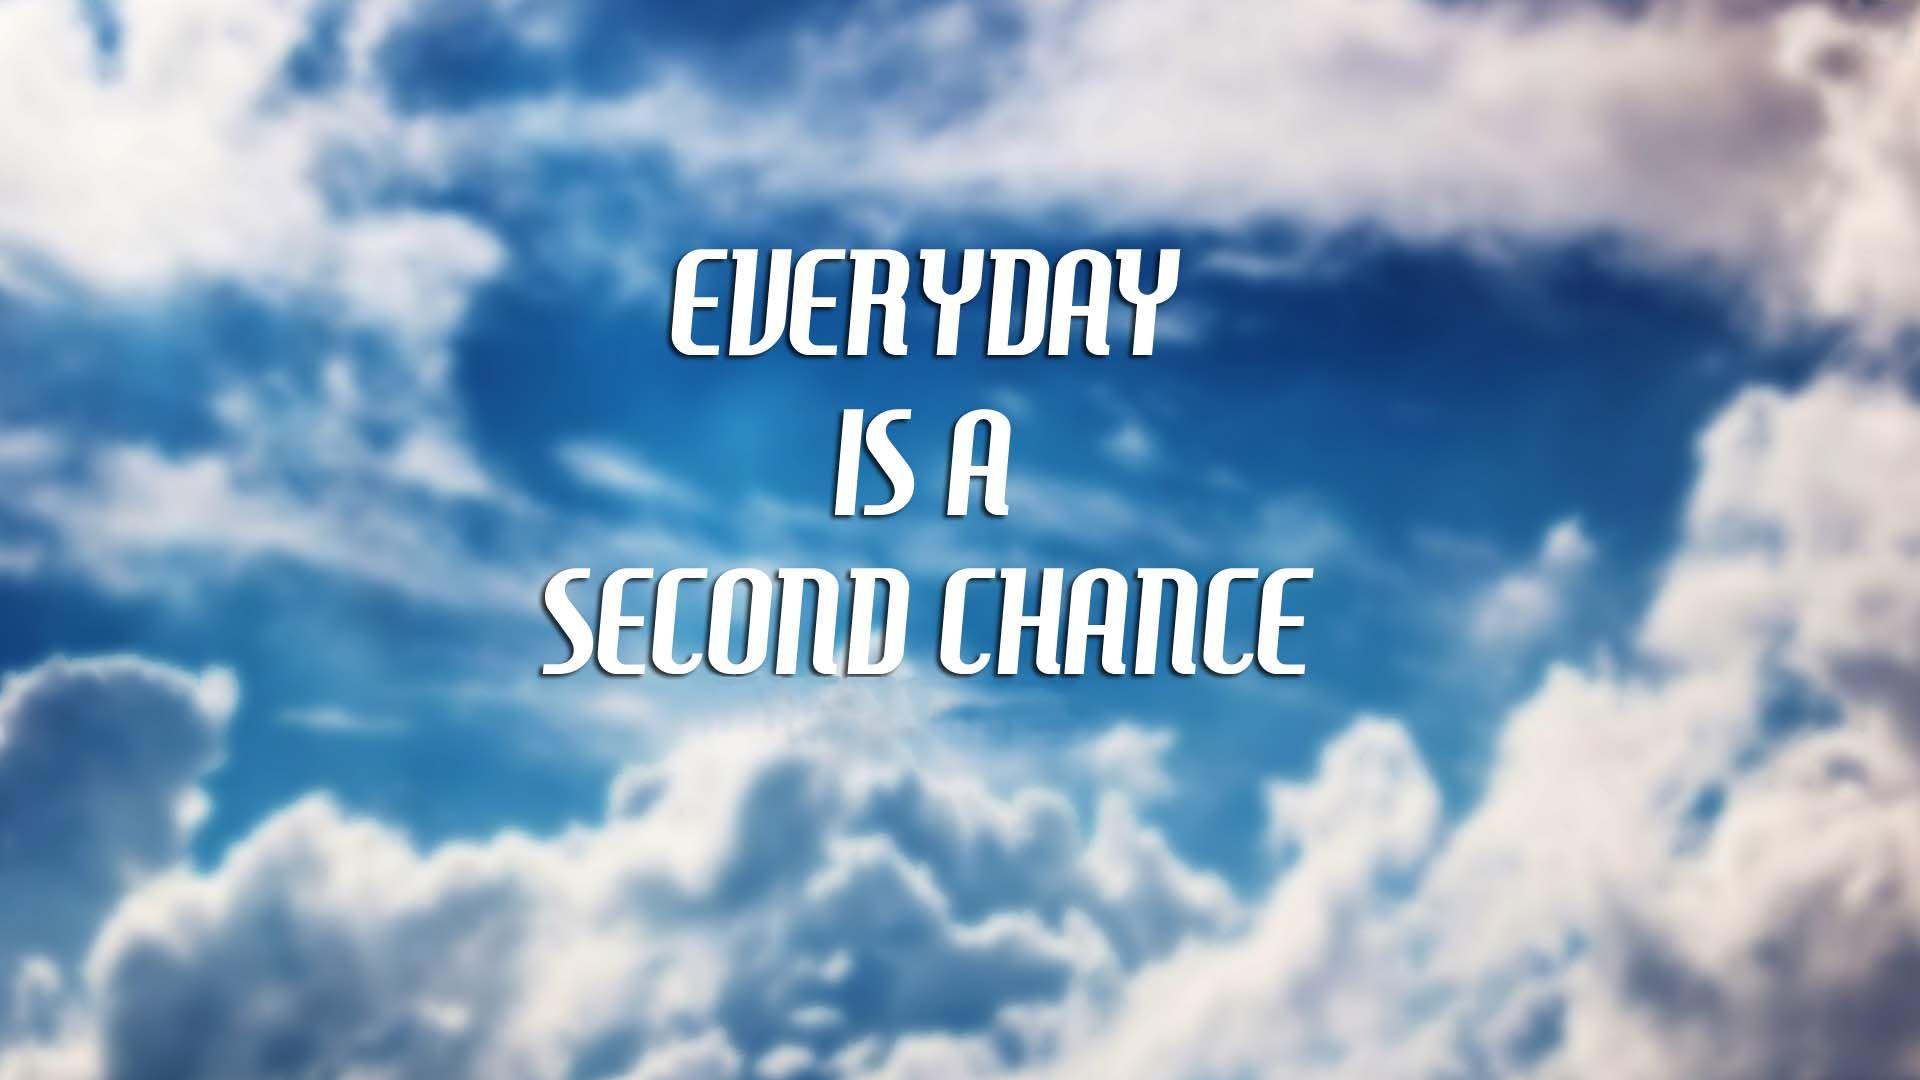 Everyday Is A Second Chance. HD Motivation Wallpaper